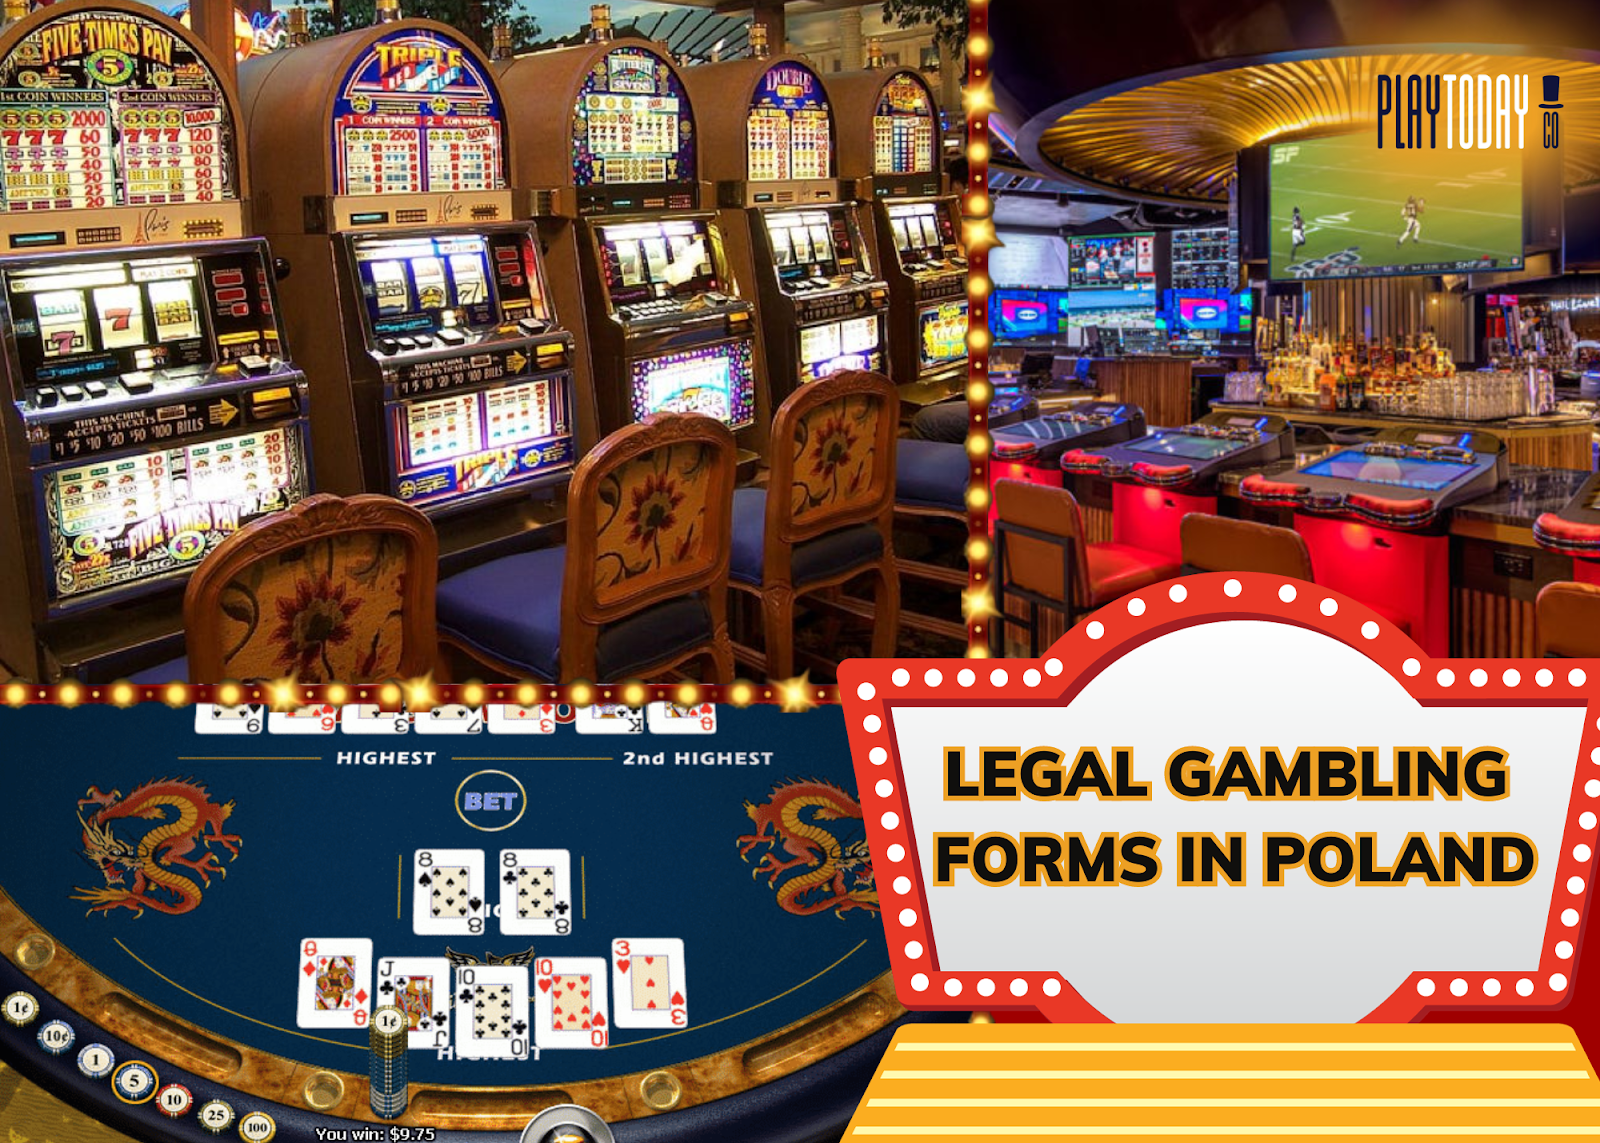 Available Gambling Forms in Poland Visualizer